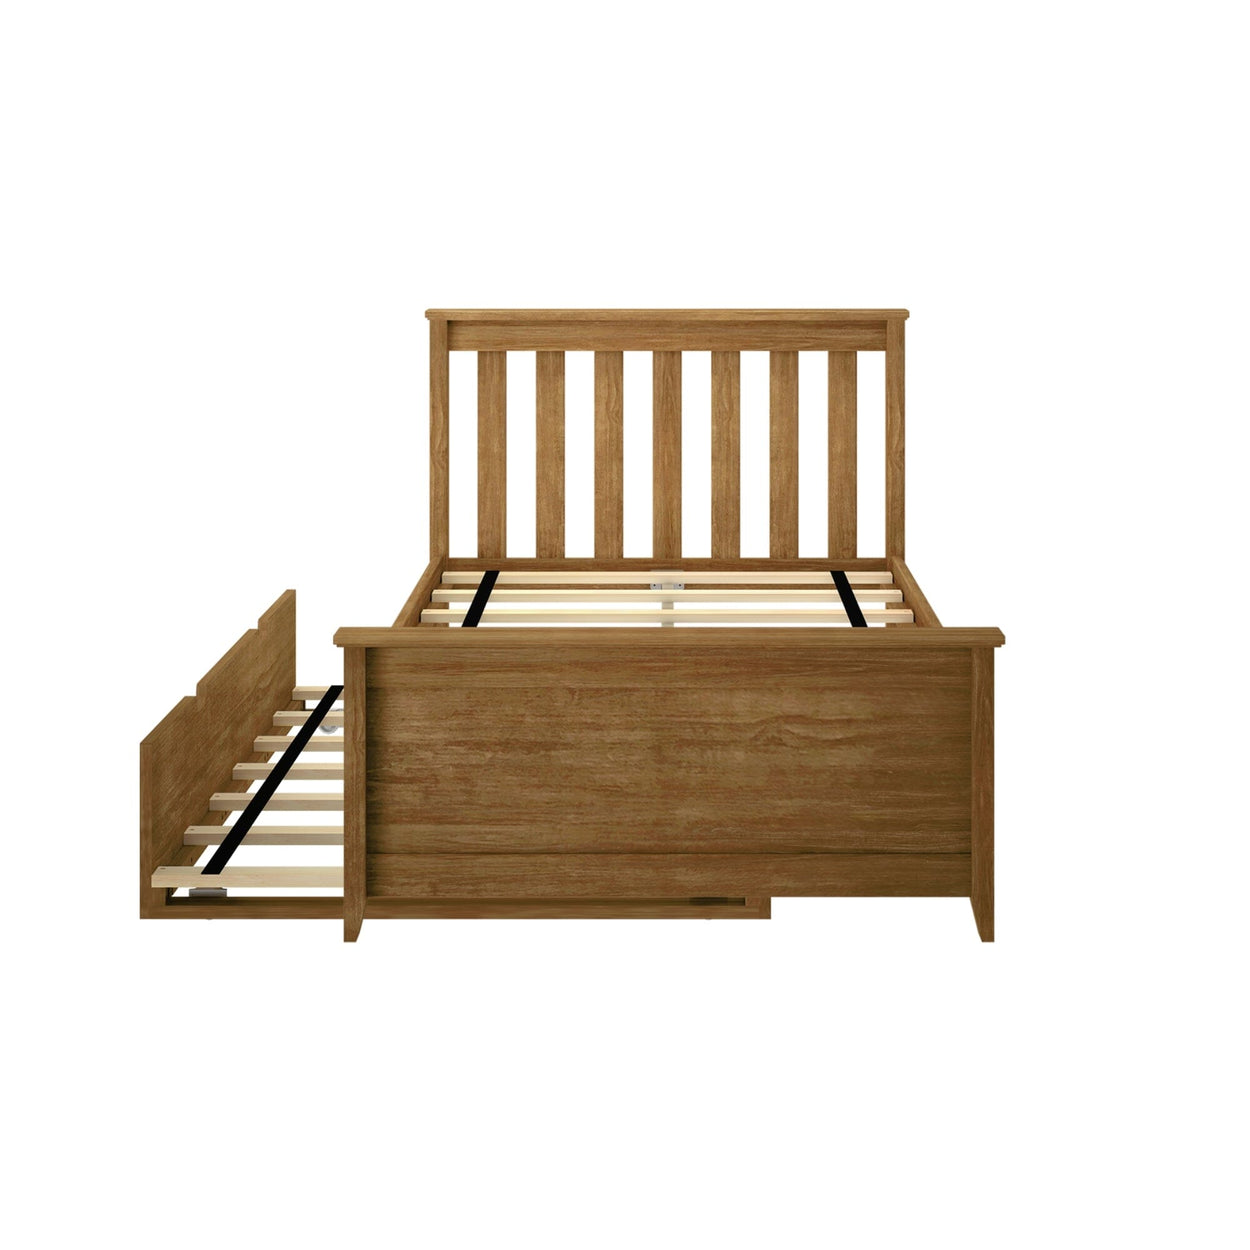 186210-007 : Kids Beds Classic Twin-Size Platform Bed with Trundle, Pecan